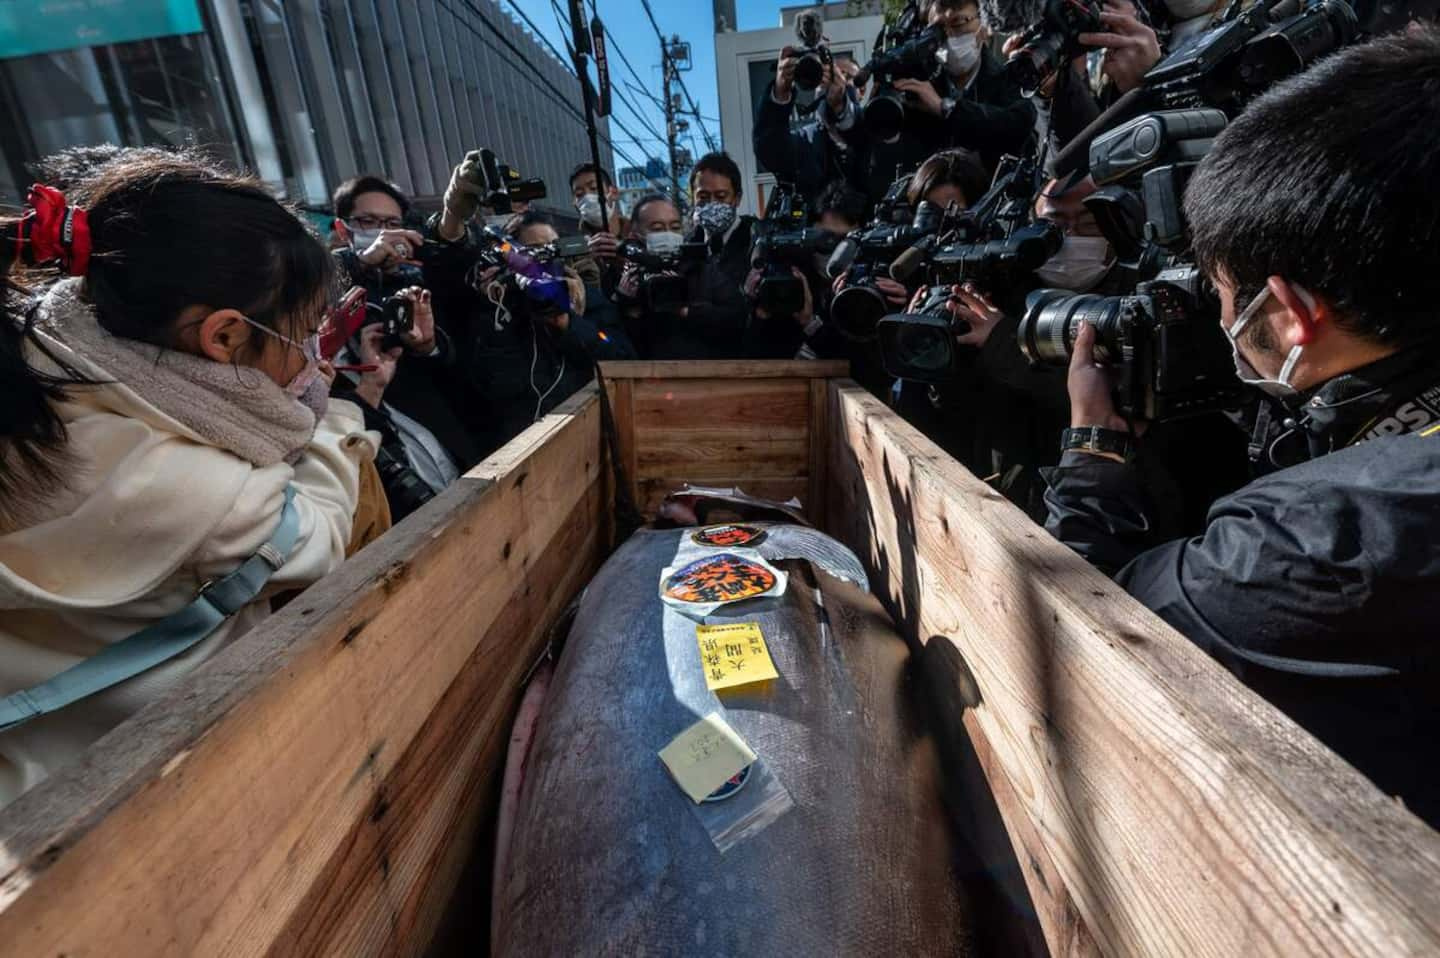 Tuna sold at auction for 369,000 Canadian dollars in Tokyo